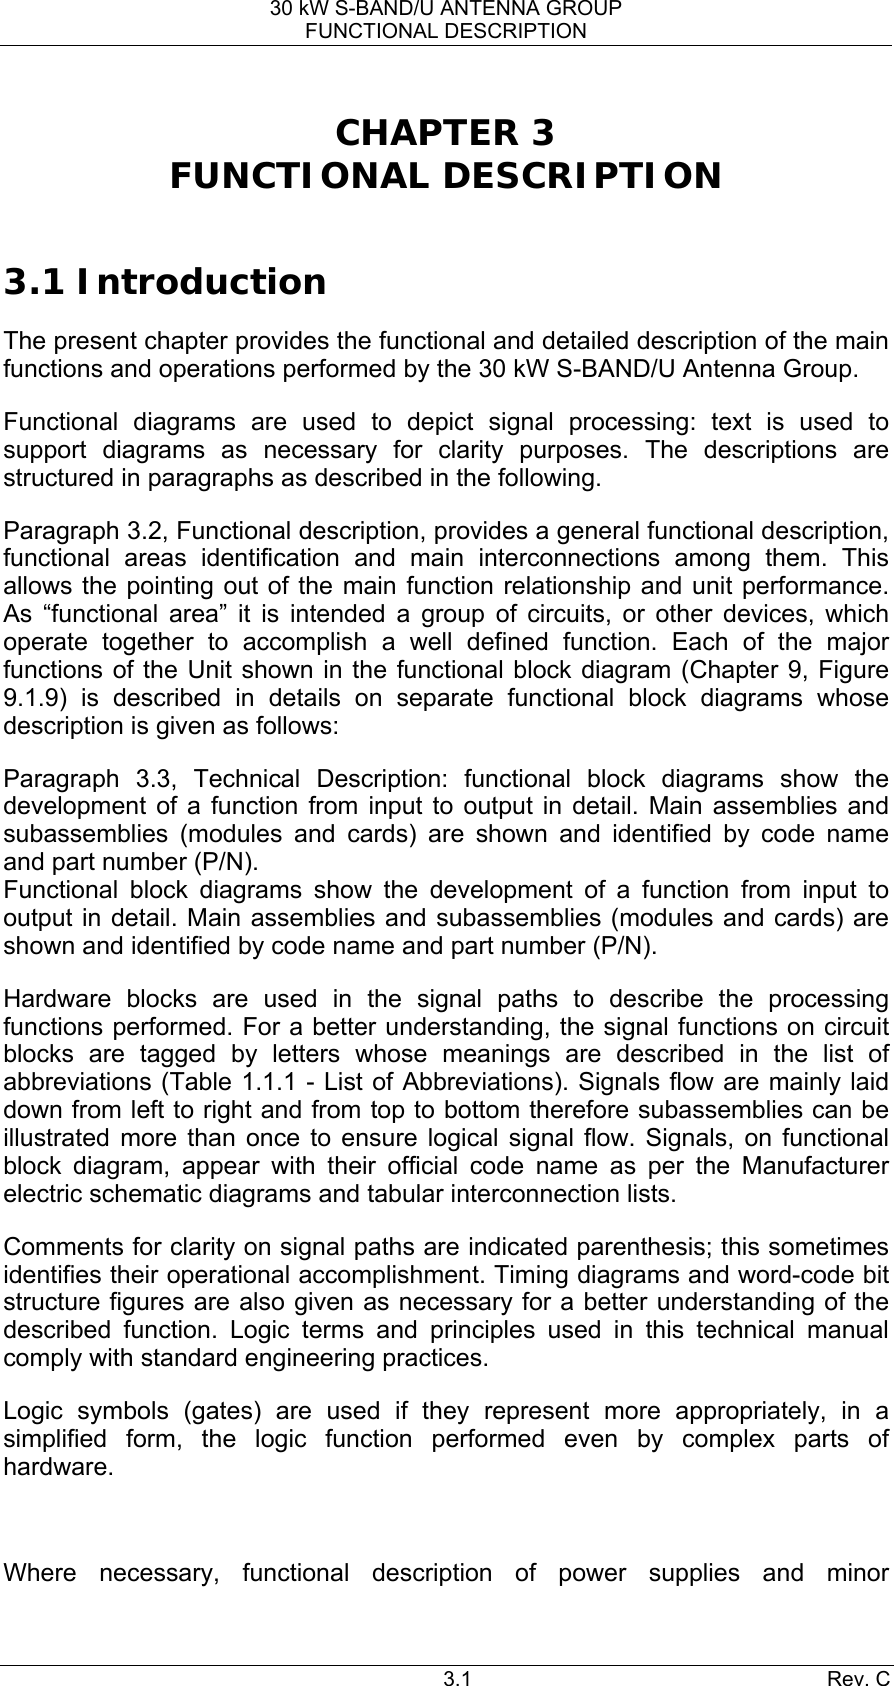 30 kW S-BAND/U ANTENNA GROUP FUNCTIONAL DESCRIPTION 3.1 Rev. C CHAPTER 3 FUNCTIONAL DESCRIPTION  3.1 Introduction The present chapter provides the functional and detailed description of the main functions and operations performed by the 30 kW S-BAND/U Antenna Group. Functional diagrams are used to depict signal processing: text is used to support diagrams as necessary for clarity purposes. The descriptions are structured in paragraphs as described in the following. Paragraph 3.2, Functional description, provides a general functional description, functional areas identification and main interconnections among them. This allows the pointing out of the main function relationship and unit performance. As “functional area” it is intended a group of circuits, or other devices, which operate together to accomplish a well defined function. Each of the major functions of the Unit shown in the functional block diagram (Chapter 9, Figure 9.1.9) is described in details on separate functional block diagrams whose description is given as follows: Paragraph 3.3, Technical Description: functional block diagrams show the development of a function from input to output in detail. Main assemblies and subassemblies (modules and cards) are shown and identified by code name and part number (P/N). Functional block diagrams show the development of a function from input to output in detail. Main assemblies and subassemblies (modules and cards) are shown and identified by code name and part number (P/N). Hardware blocks are used in the signal paths to describe the processing functions performed. For a better understanding, the signal functions on circuit blocks are tagged by letters whose meanings are described in the list of abbreviations (Table 1.1.1 - List of Abbreviations). Signals flow are mainly laid down from left to right and from top to bottom therefore subassemblies can be illustrated more than once to ensure logical signal flow. Signals, on functional block diagram, appear with their official code name as per the Manufacturer electric schematic diagrams and tabular interconnection lists. Comments for clarity on signal paths are indicated parenthesis; this sometimes identifies their operational accomplishment. Timing diagrams and word-code bit structure figures are also given as necessary for a better understanding of the described function. Logic terms and principles used in this technical manual comply with standard engineering practices. Logic symbols (gates) are used if they represent more appropriately, in a simplified form, the logic function performed even by complex parts of hardware.  Where necessary, functional description of power supplies and minor 